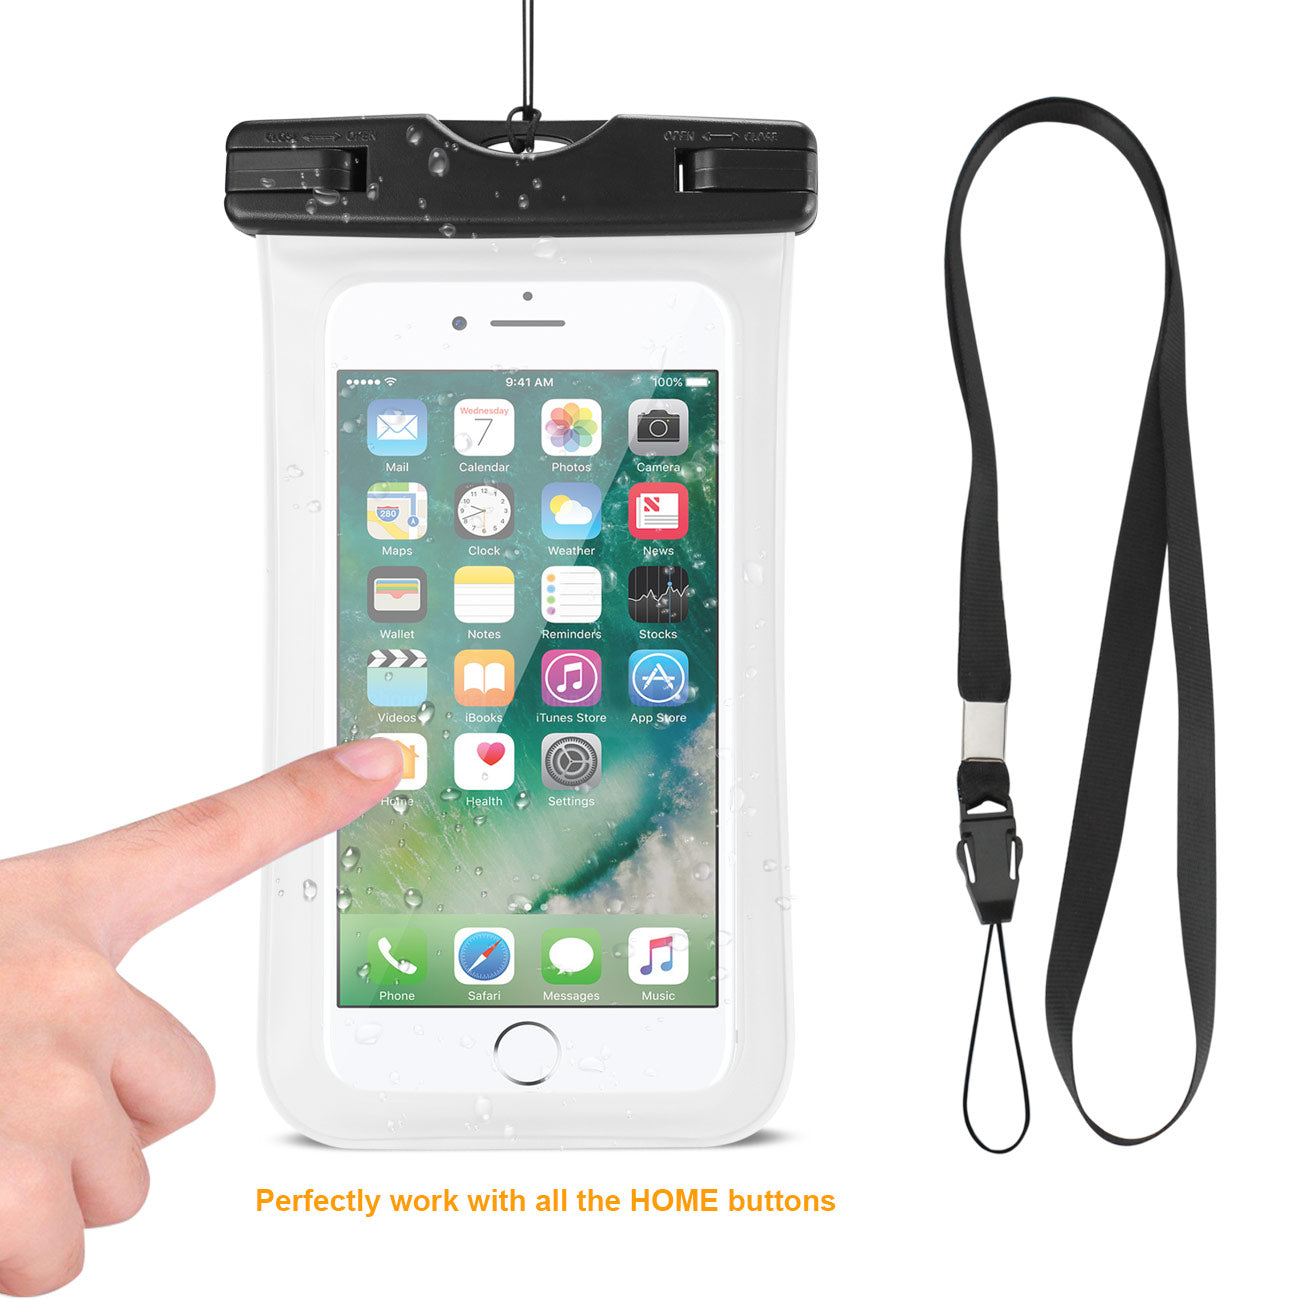 Reiko Waterproof Case With Touch Screen For 5.5X3X0.5 Inch Devices With Wrist Strap In White